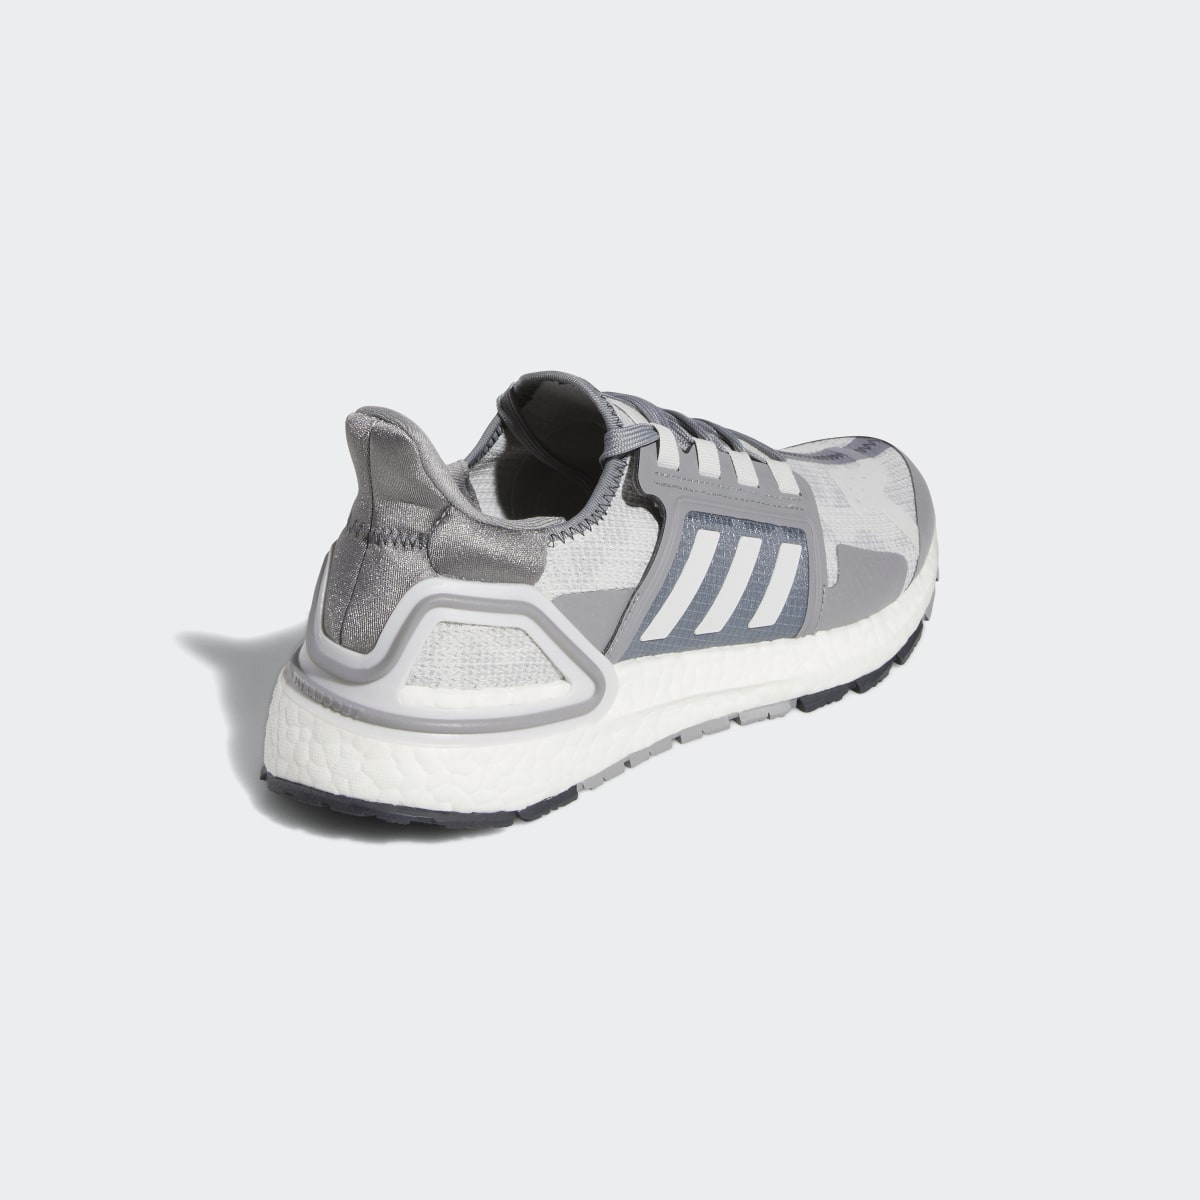 Adidas Ultraboost DNA City Explorer Outdoor Trail Running Sportswear Lifestyle Shoes. 6